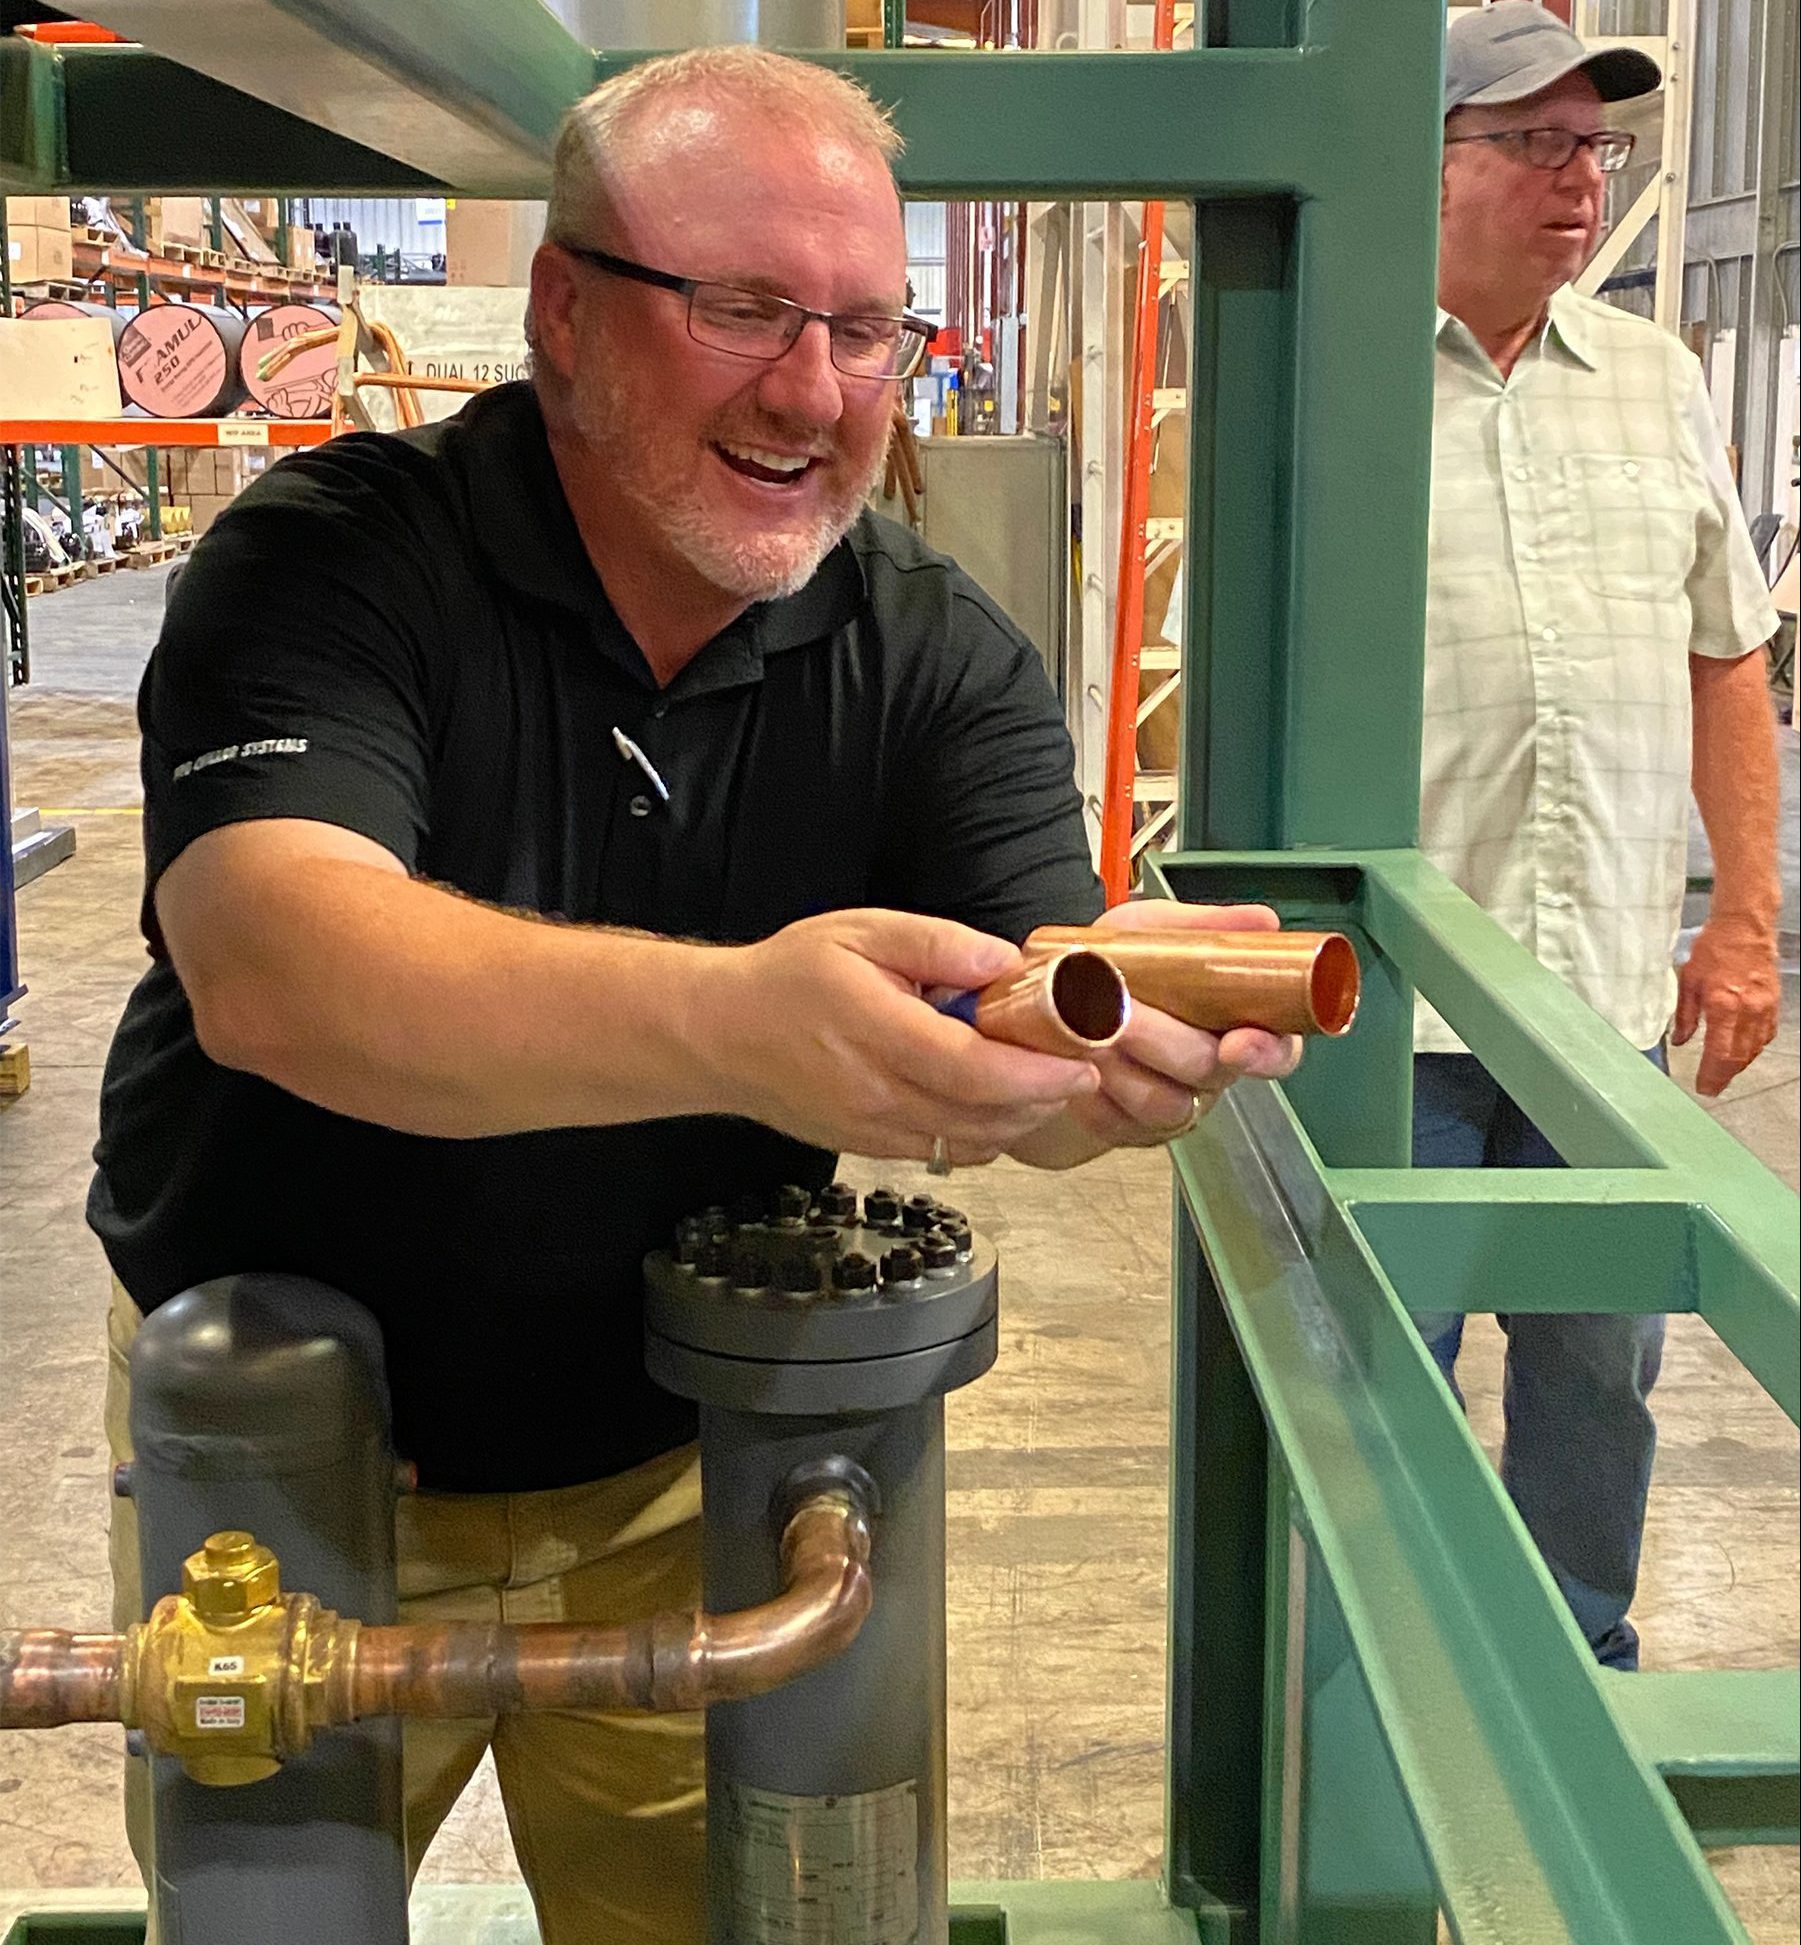 Damon Reed shows the thicker copper piping used on the CO2 system compared to a traditional freon-based system.